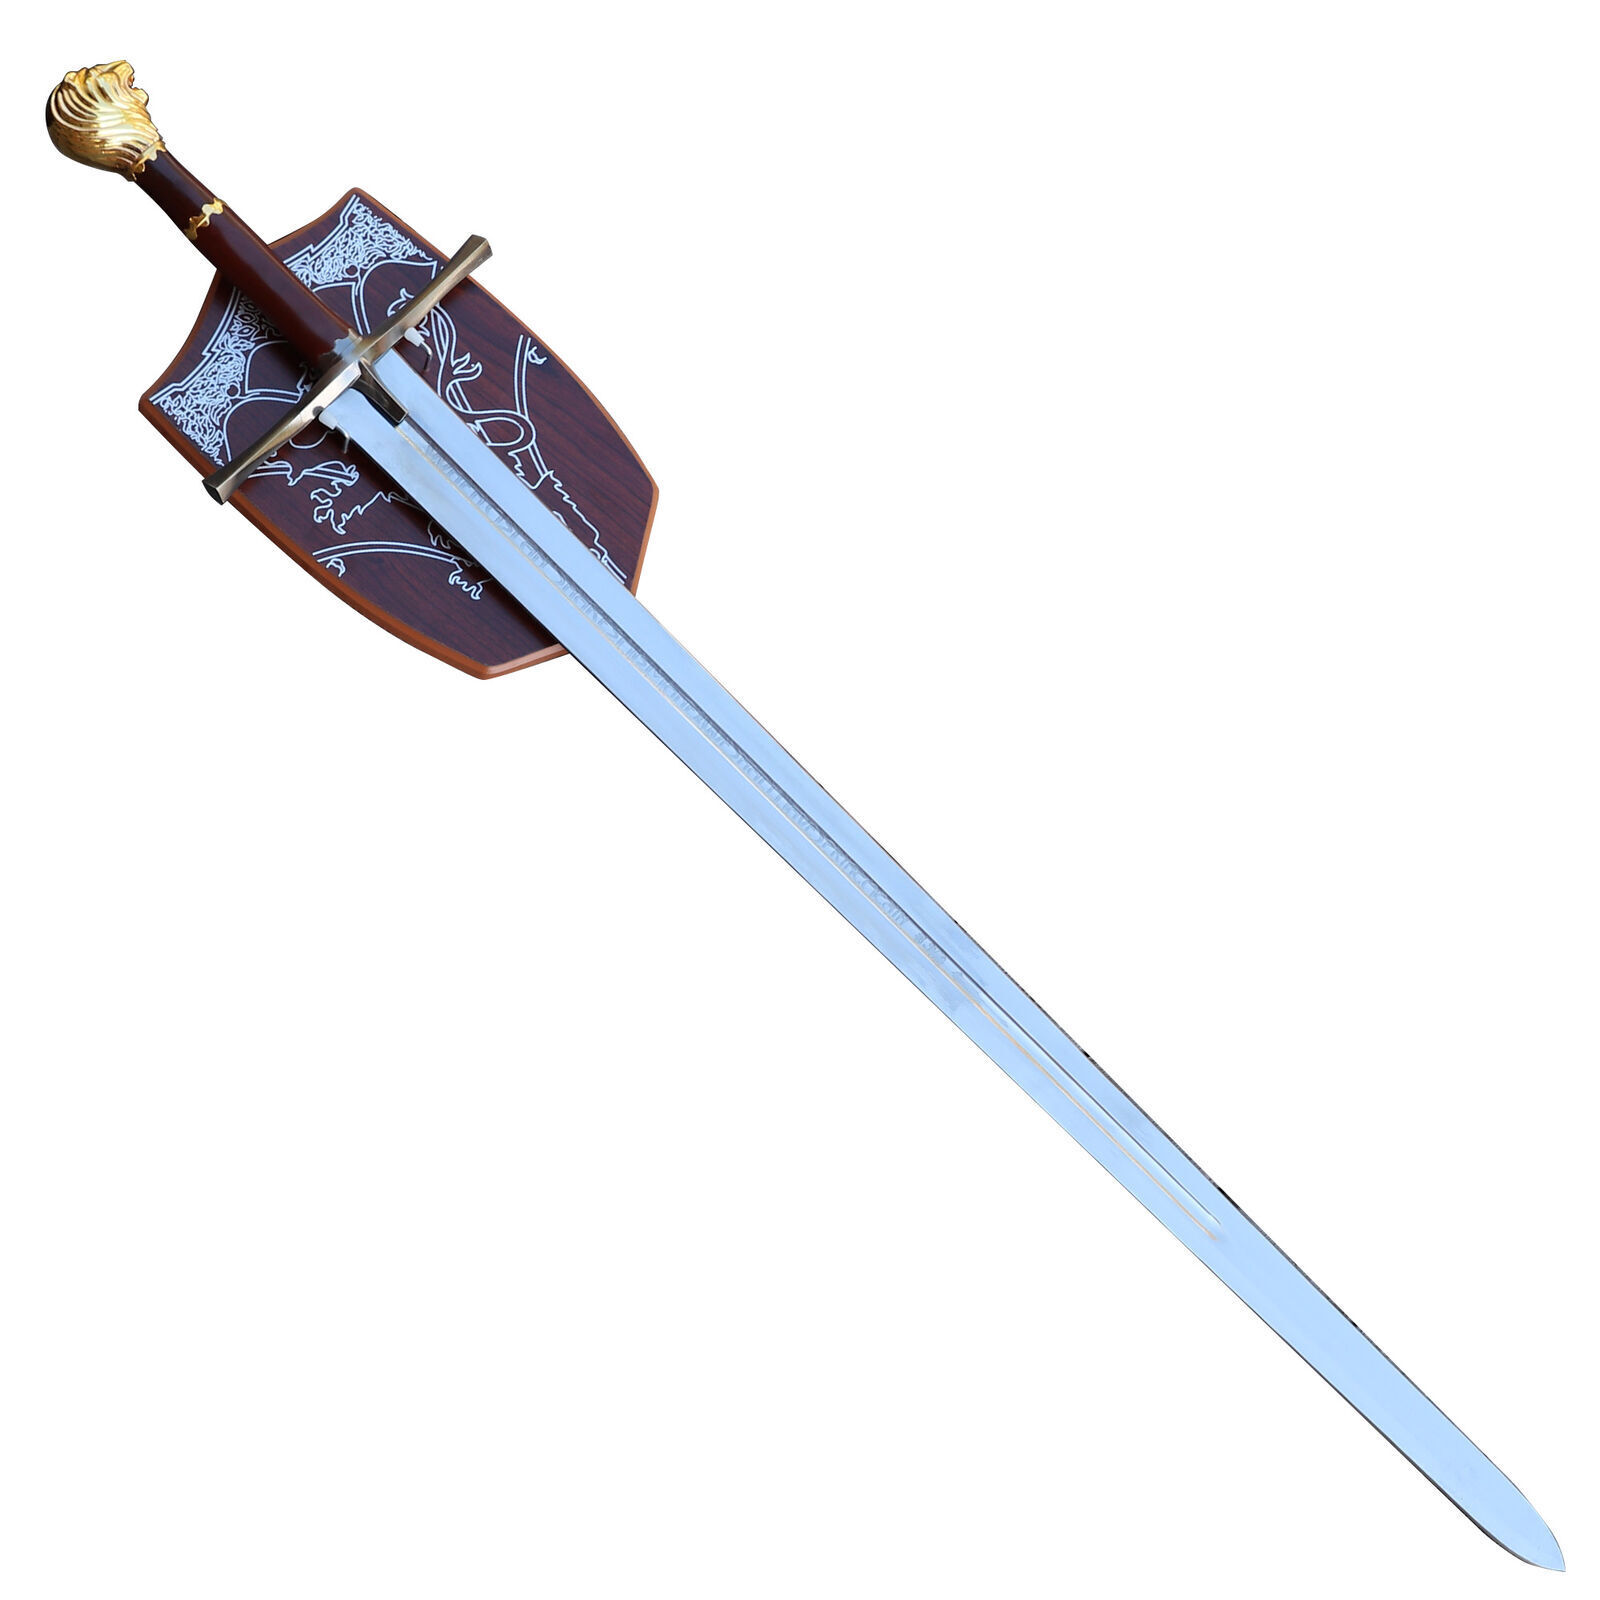 NARNIA CHRONICLES MOVIE PRINCE MEDIEVEAL SWORD REPLICA WITH INSCRIPTION + PLAQUE